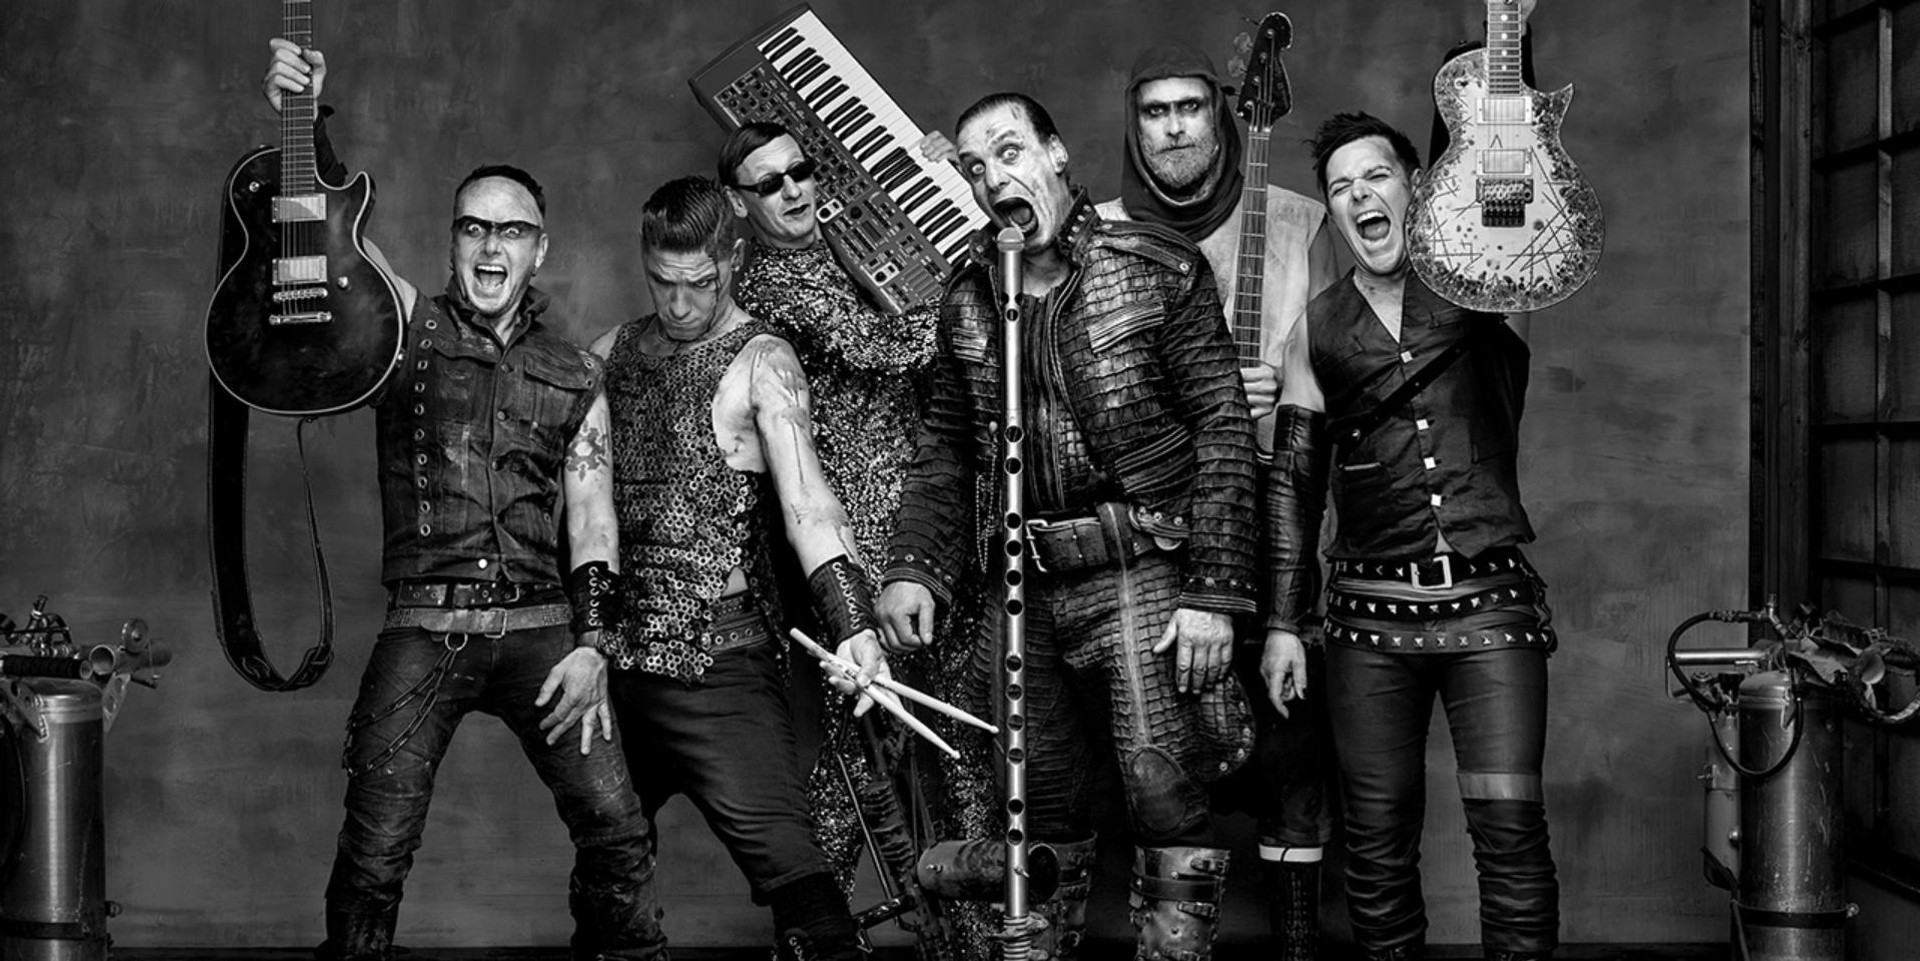 Listen to snippets of riffs used in Rammstein's upcoming album 